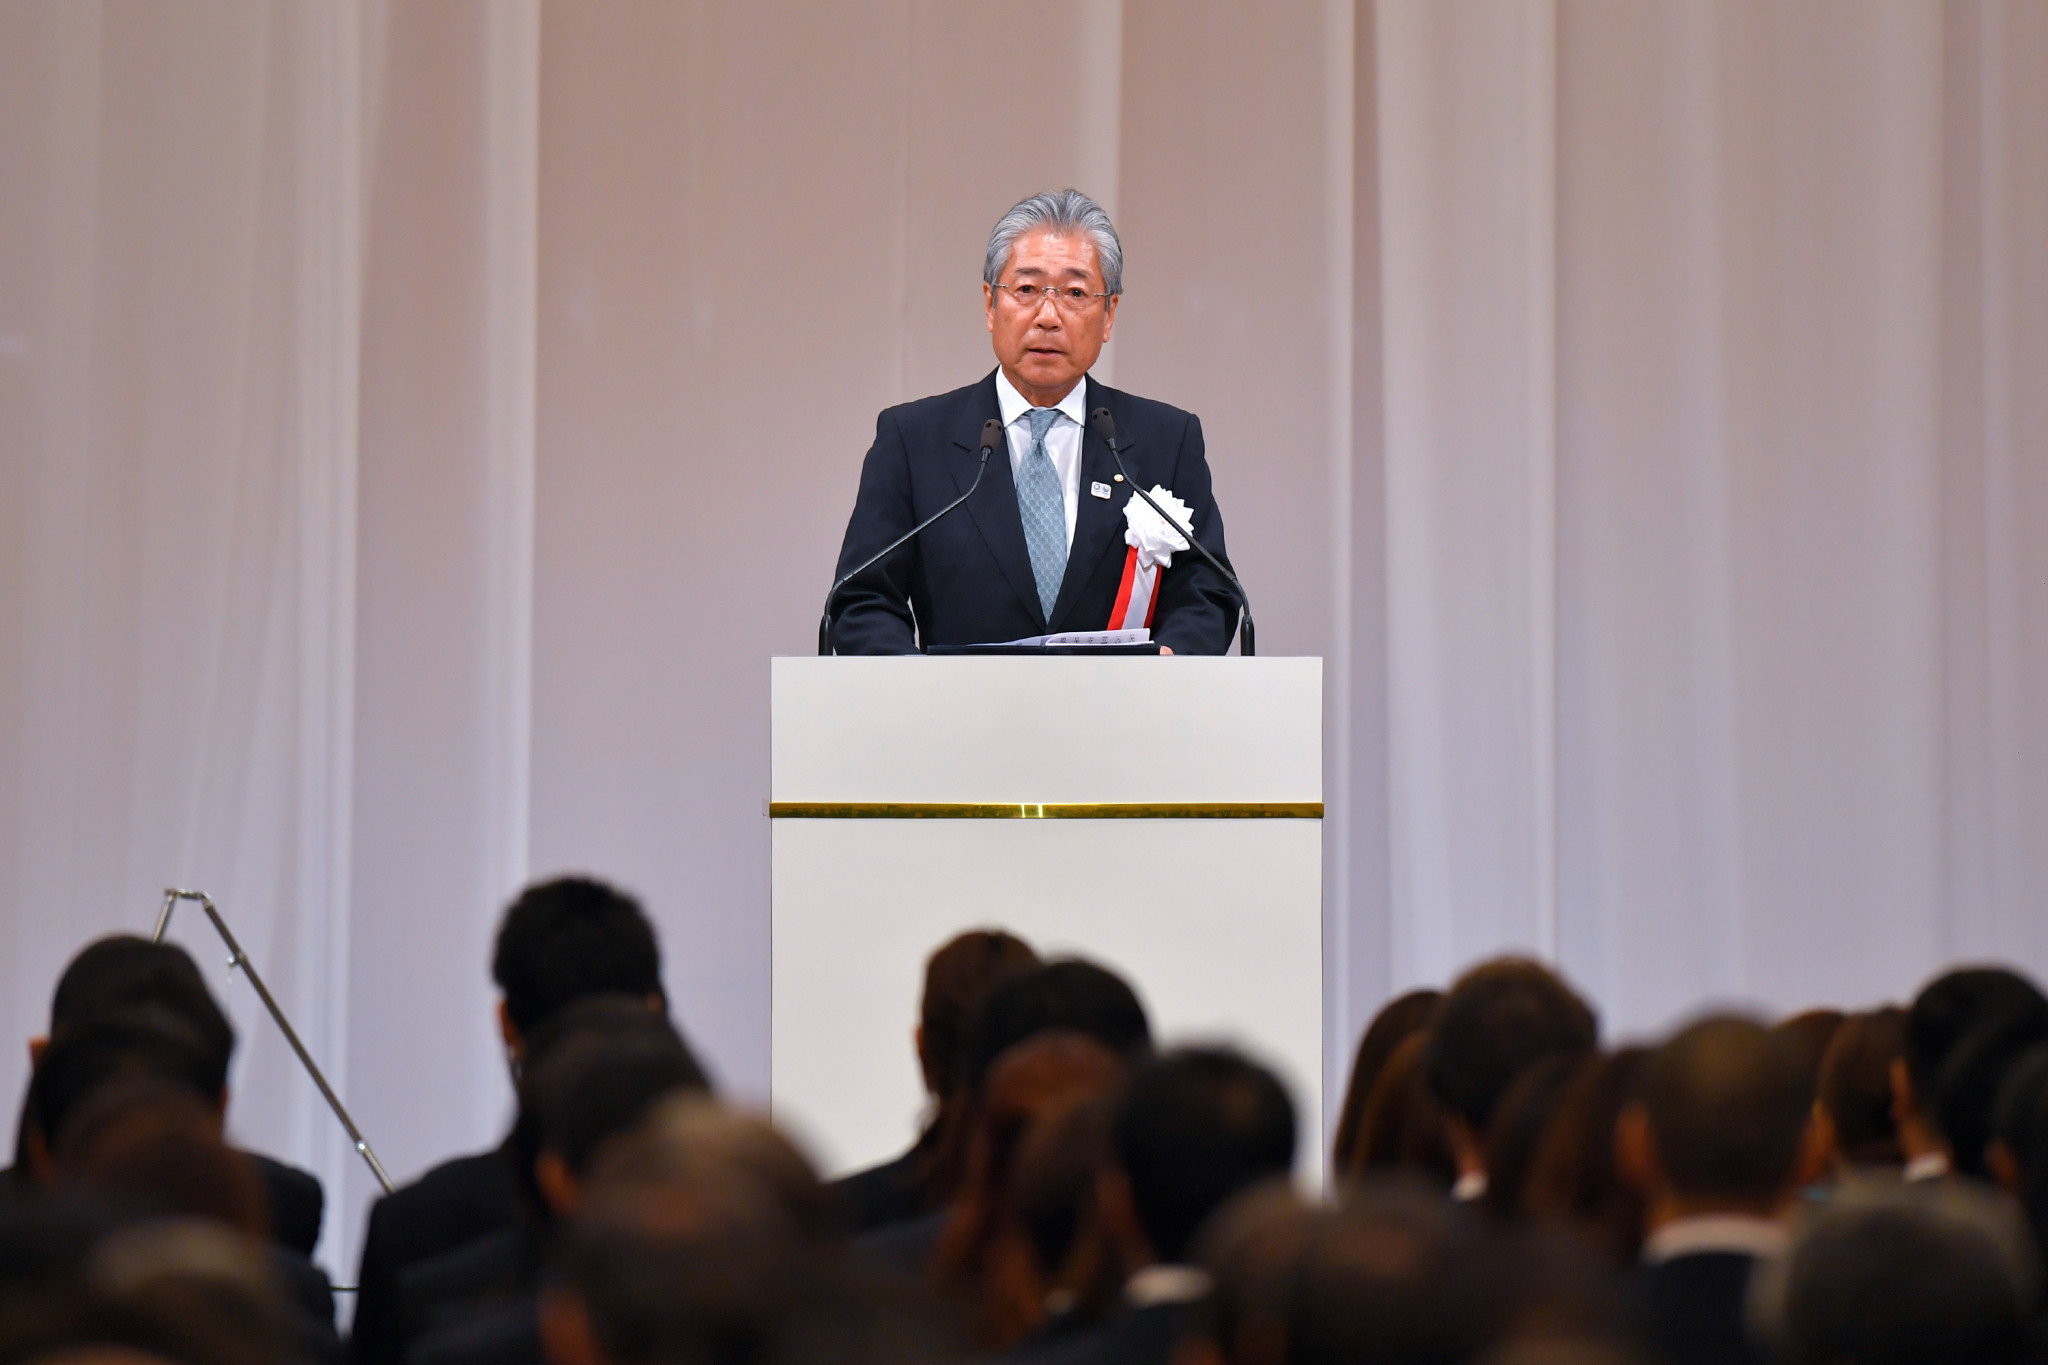 Japanese Olympic Committee President Takeda impressed by Asian Games equestrian venue